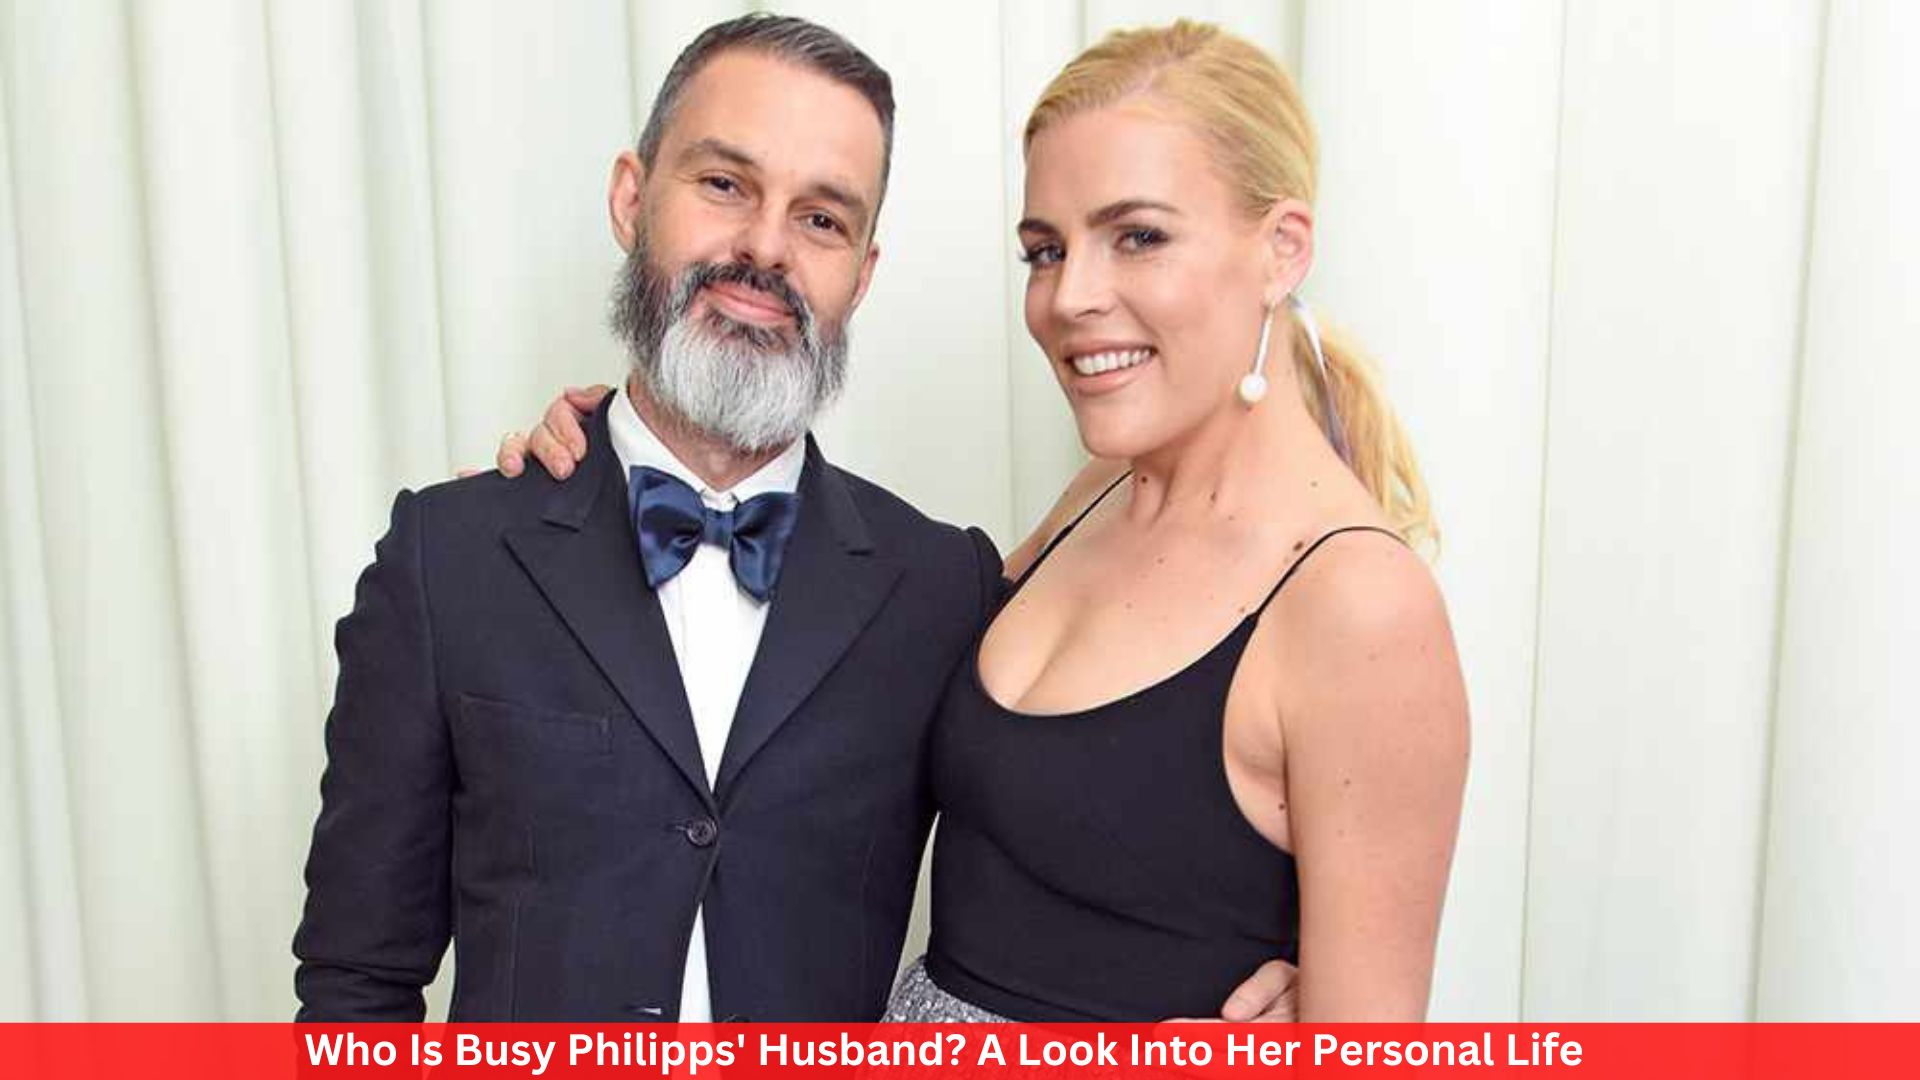 Who Is Busy Philipps' Husband? A Look Into Her Personal Life